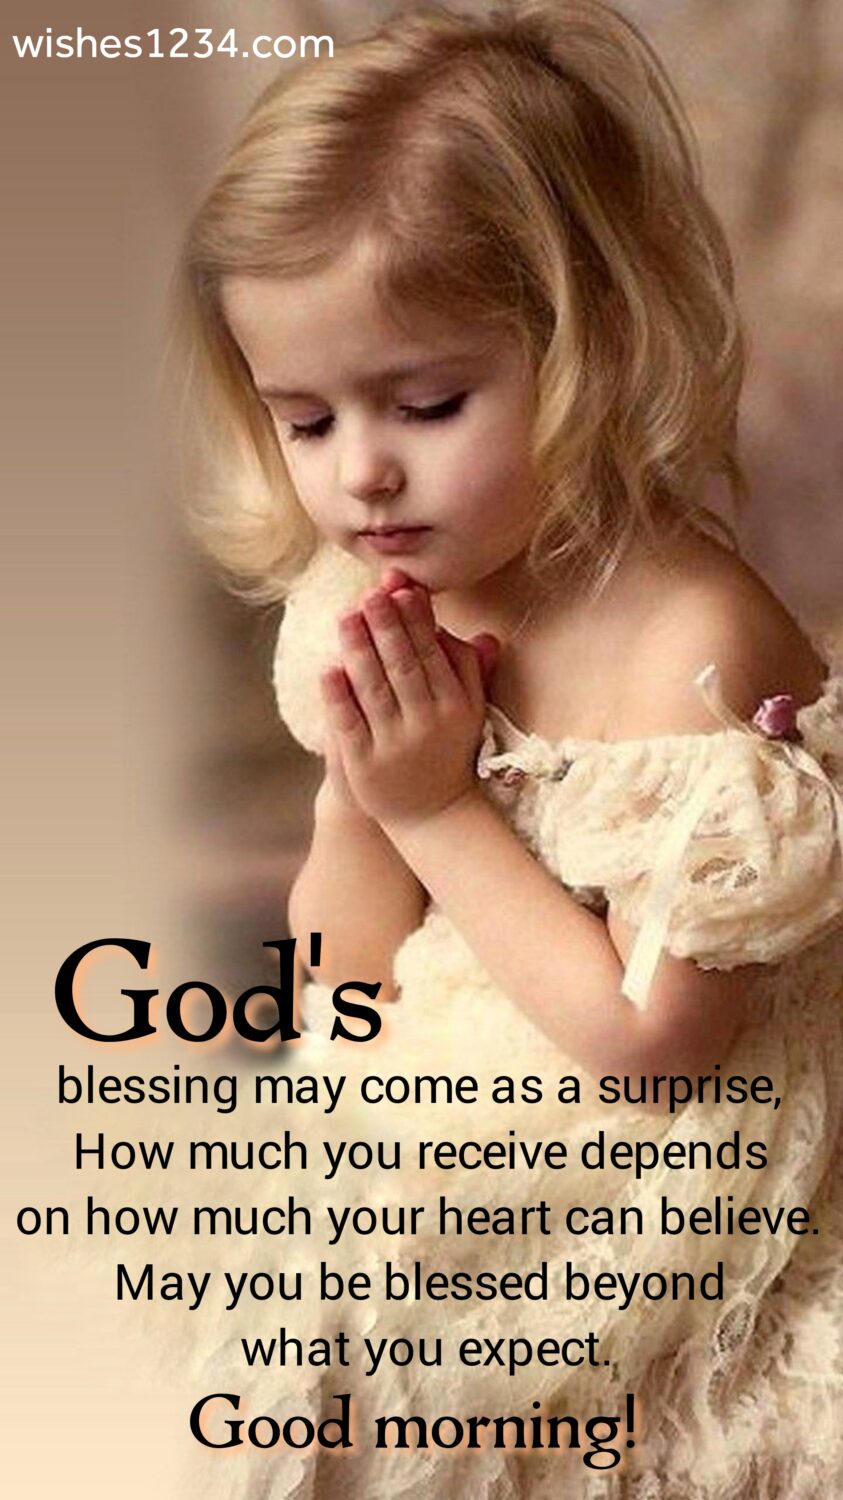 Cute little girl praying with folded hands, Happy Saturday | Saturday Greetings.